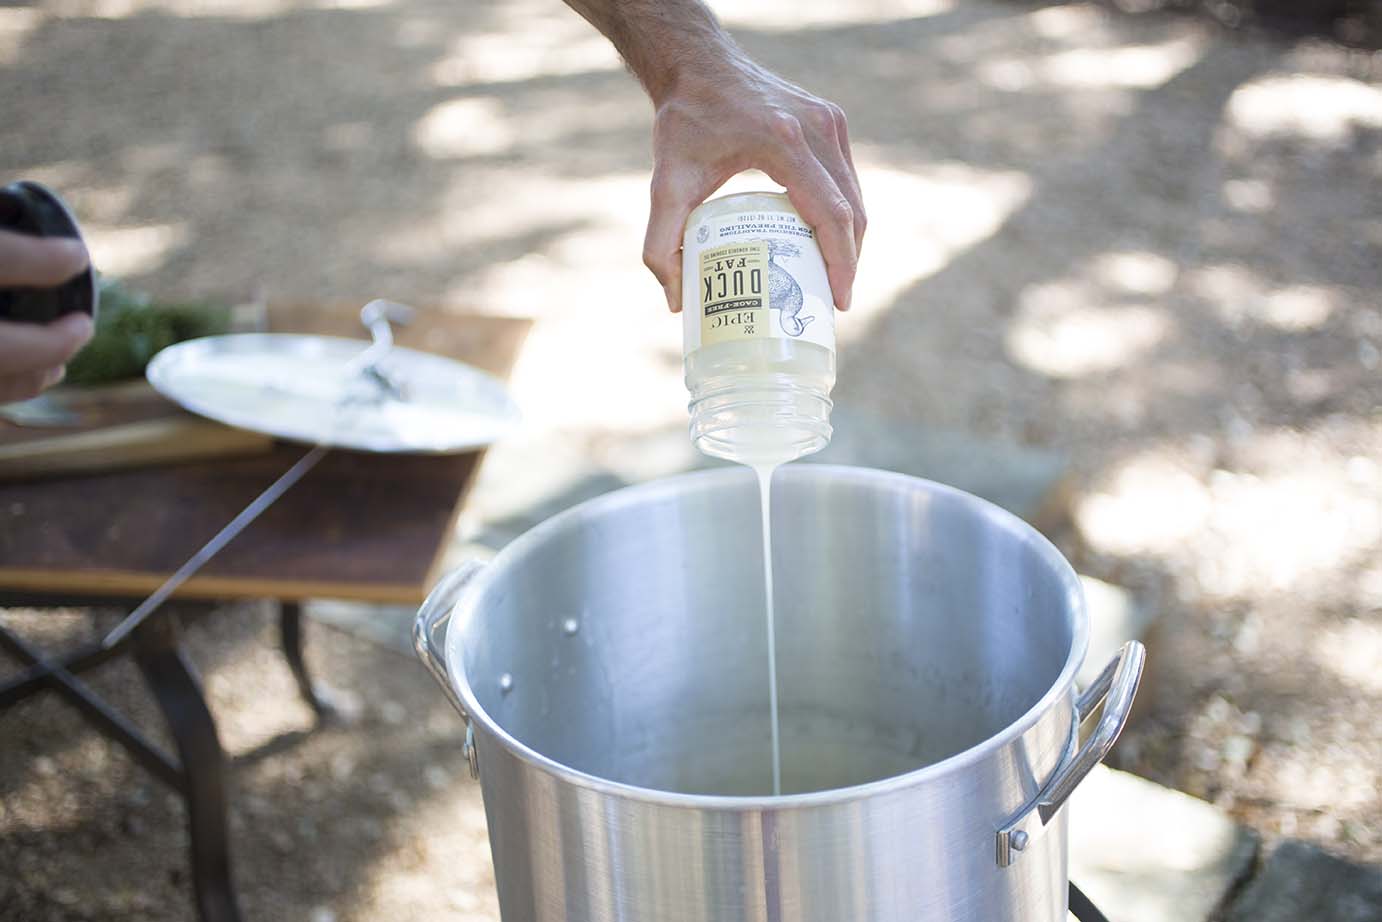 A hand is shown pouring EPIC duck fat into fryer 